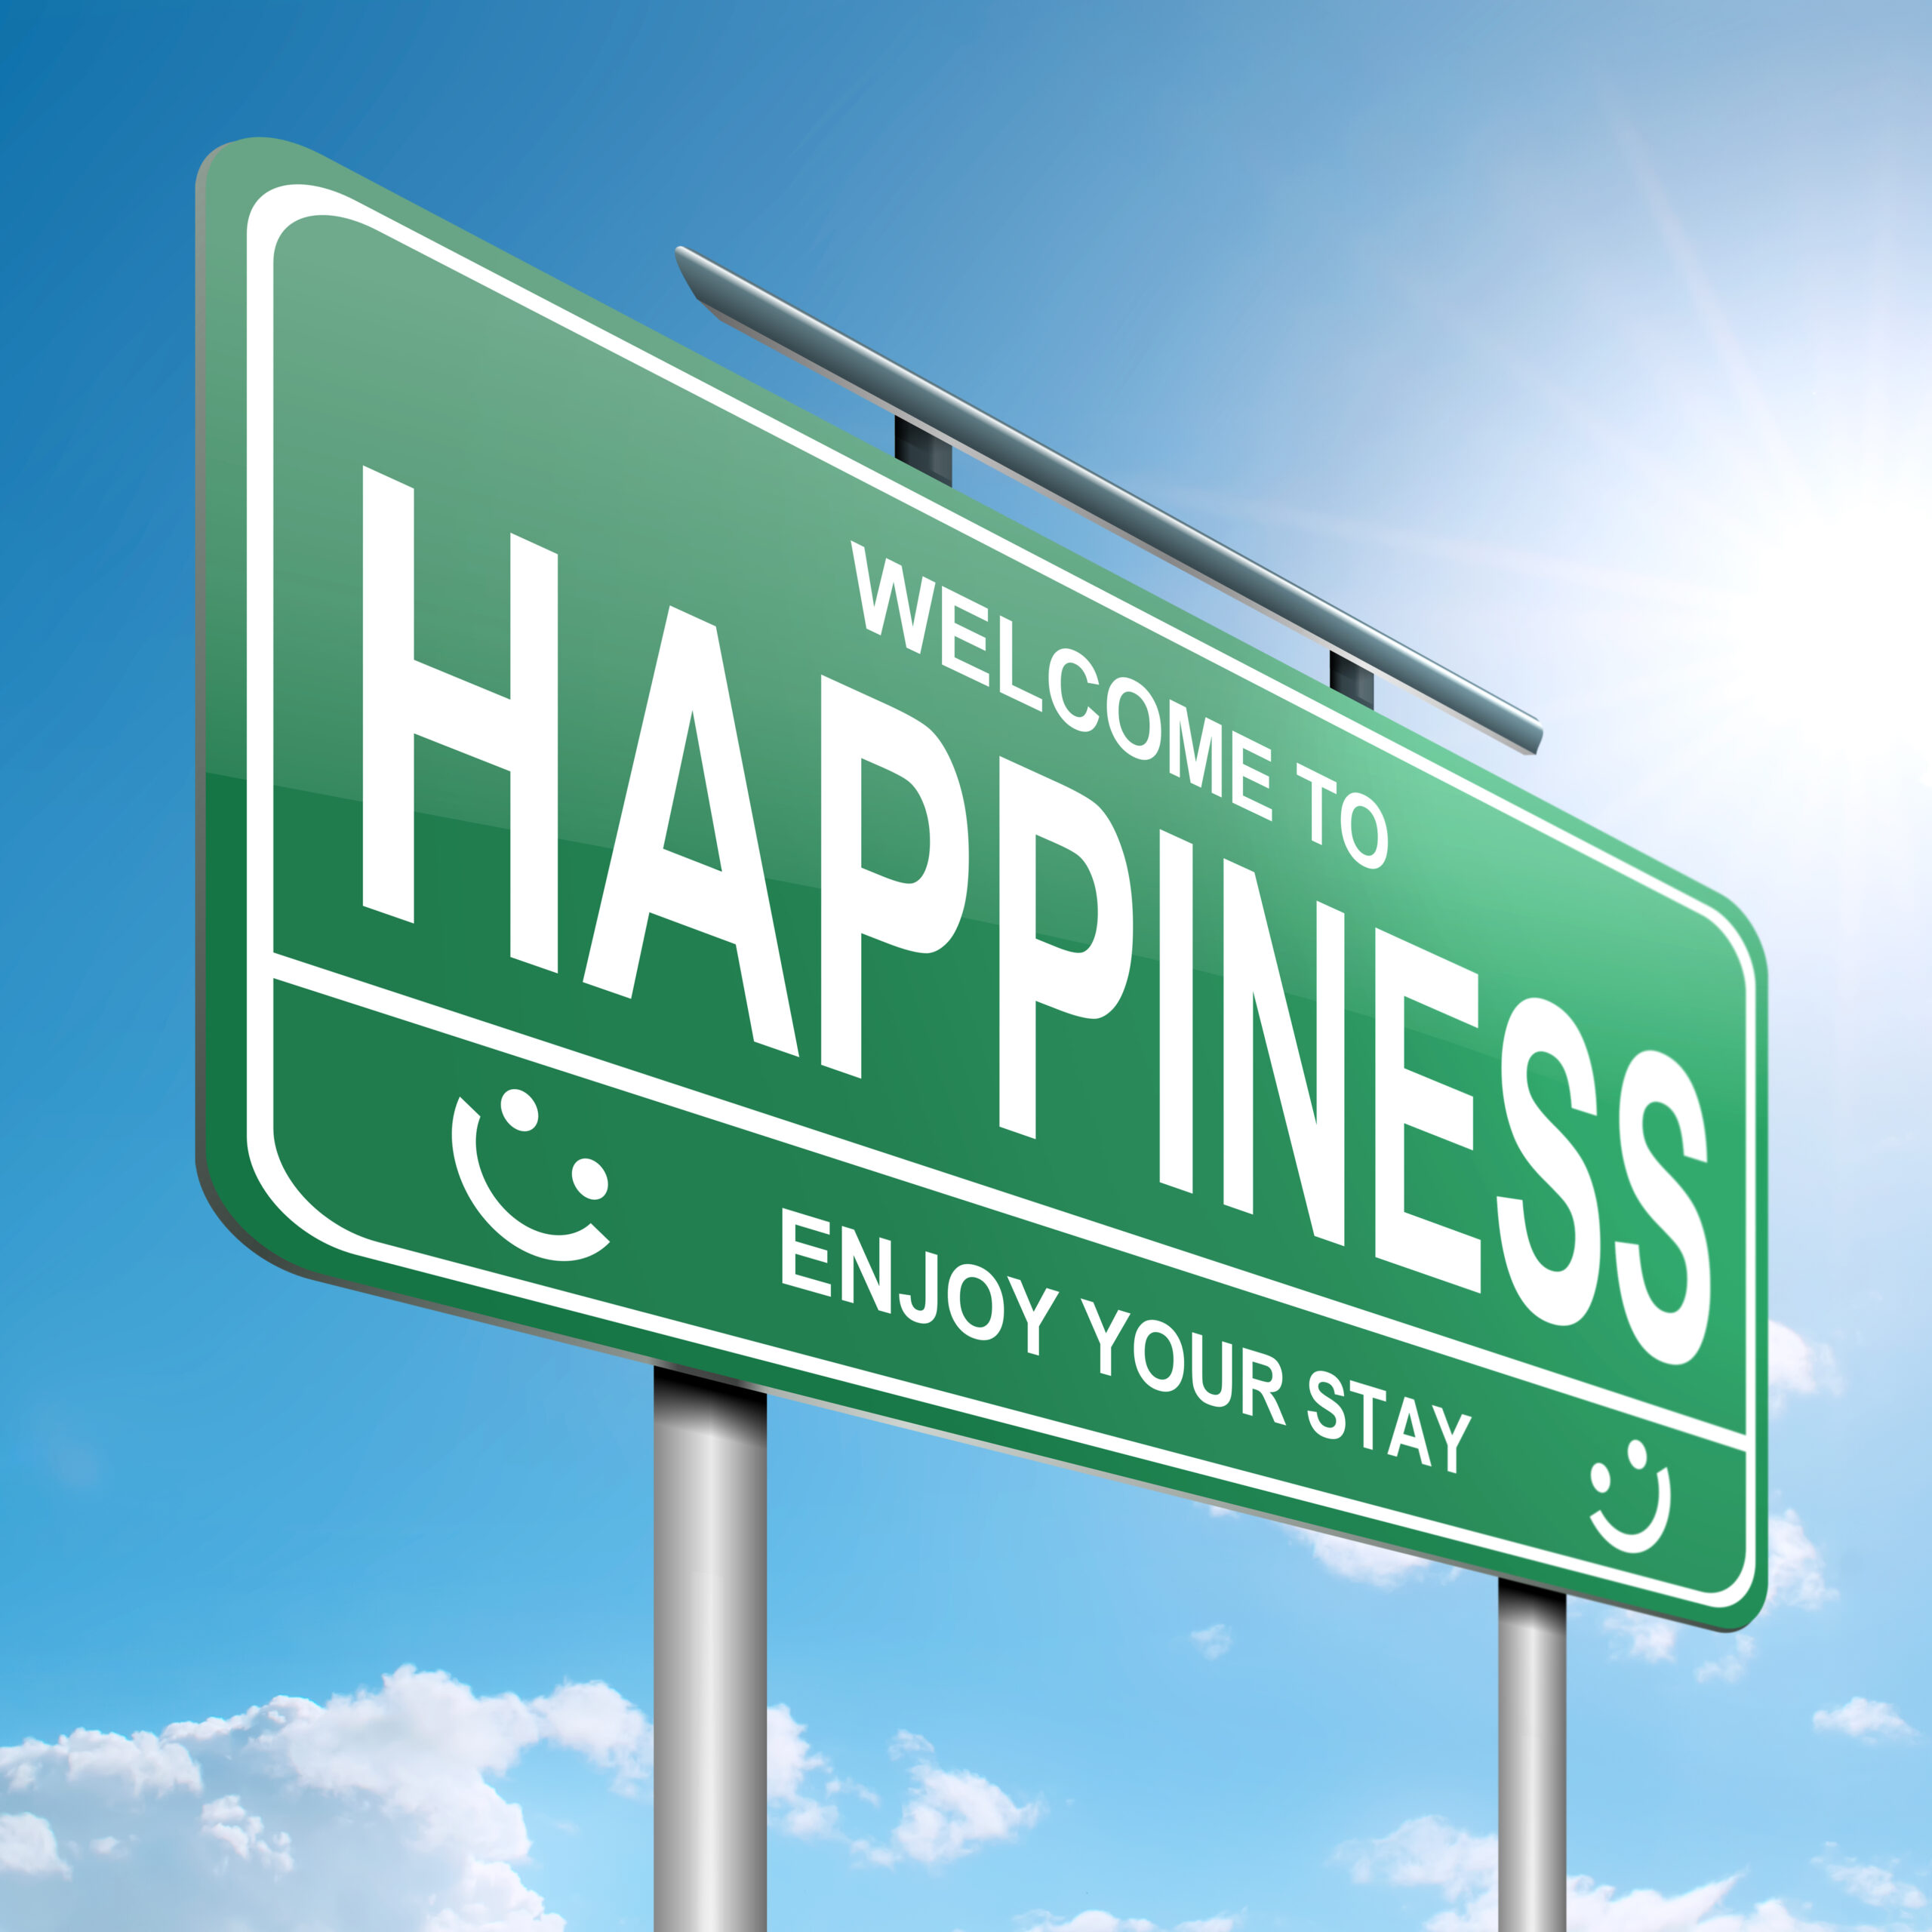 Happiness vs Success – Can We Have Both?